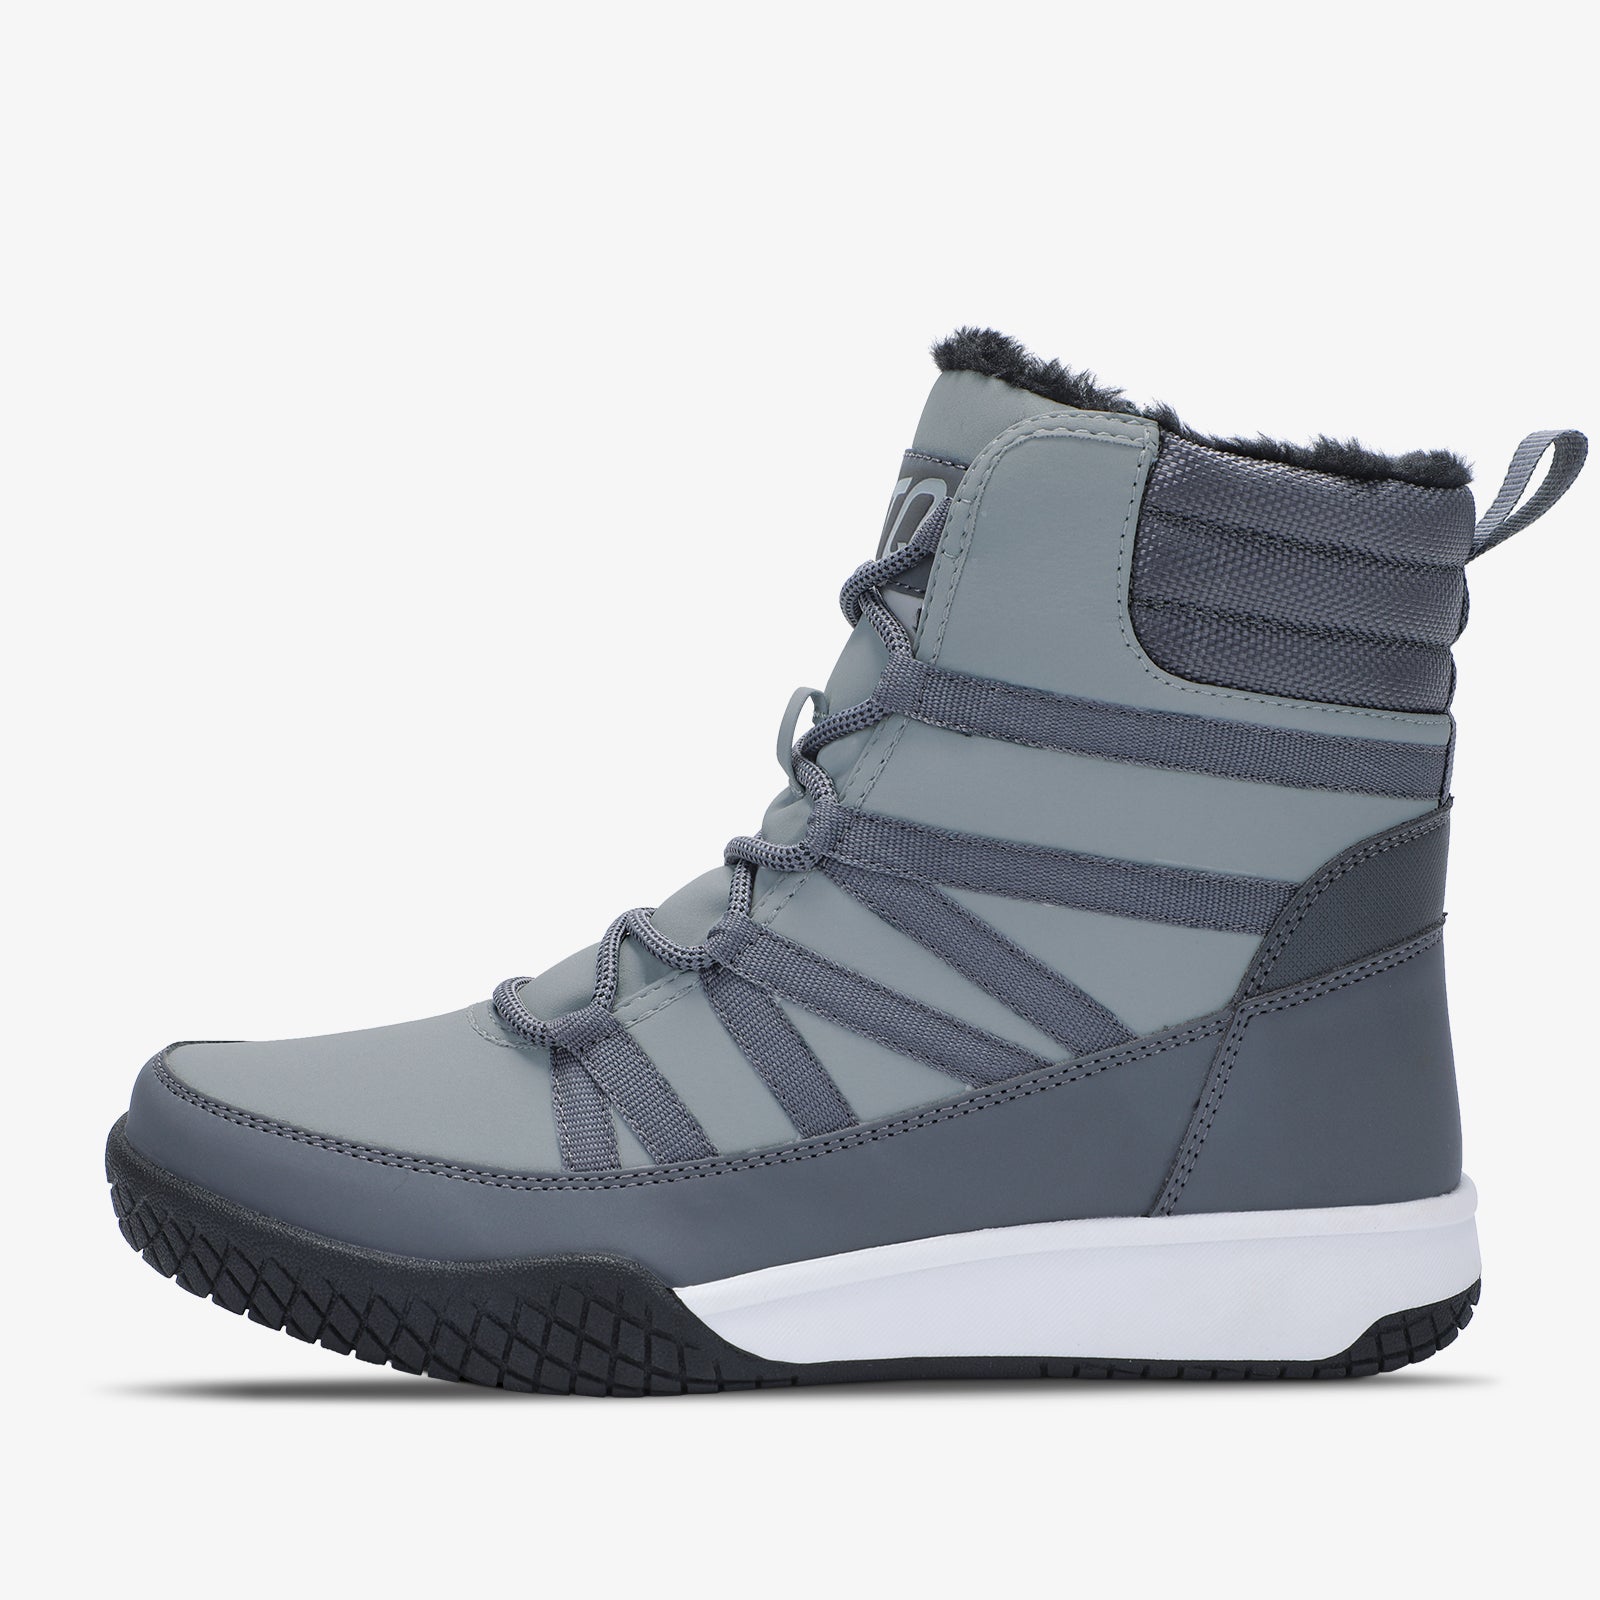 stq-product-view-winter-walking-boots-women-snow-boots